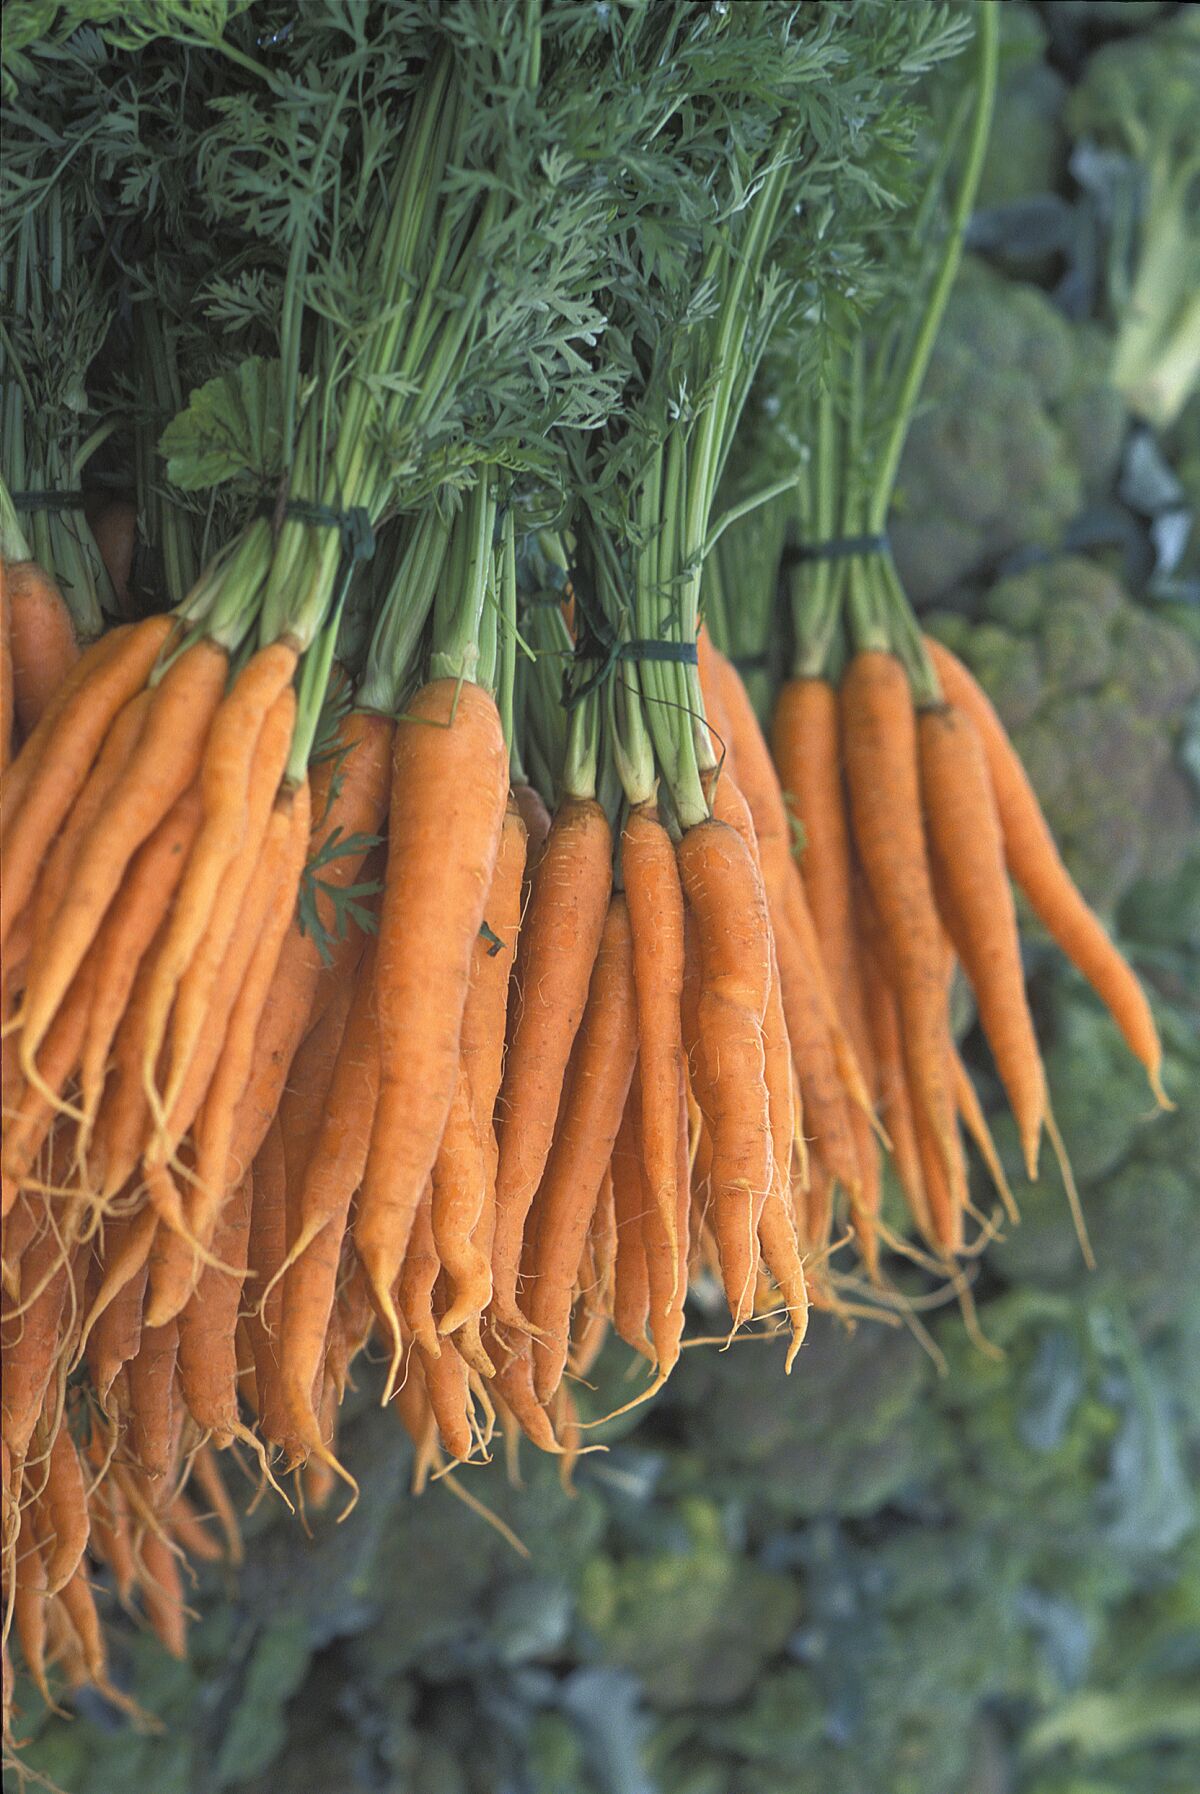 The long, taper-rooted Imperator is the carrot variety most commonly seen in grocery stores.